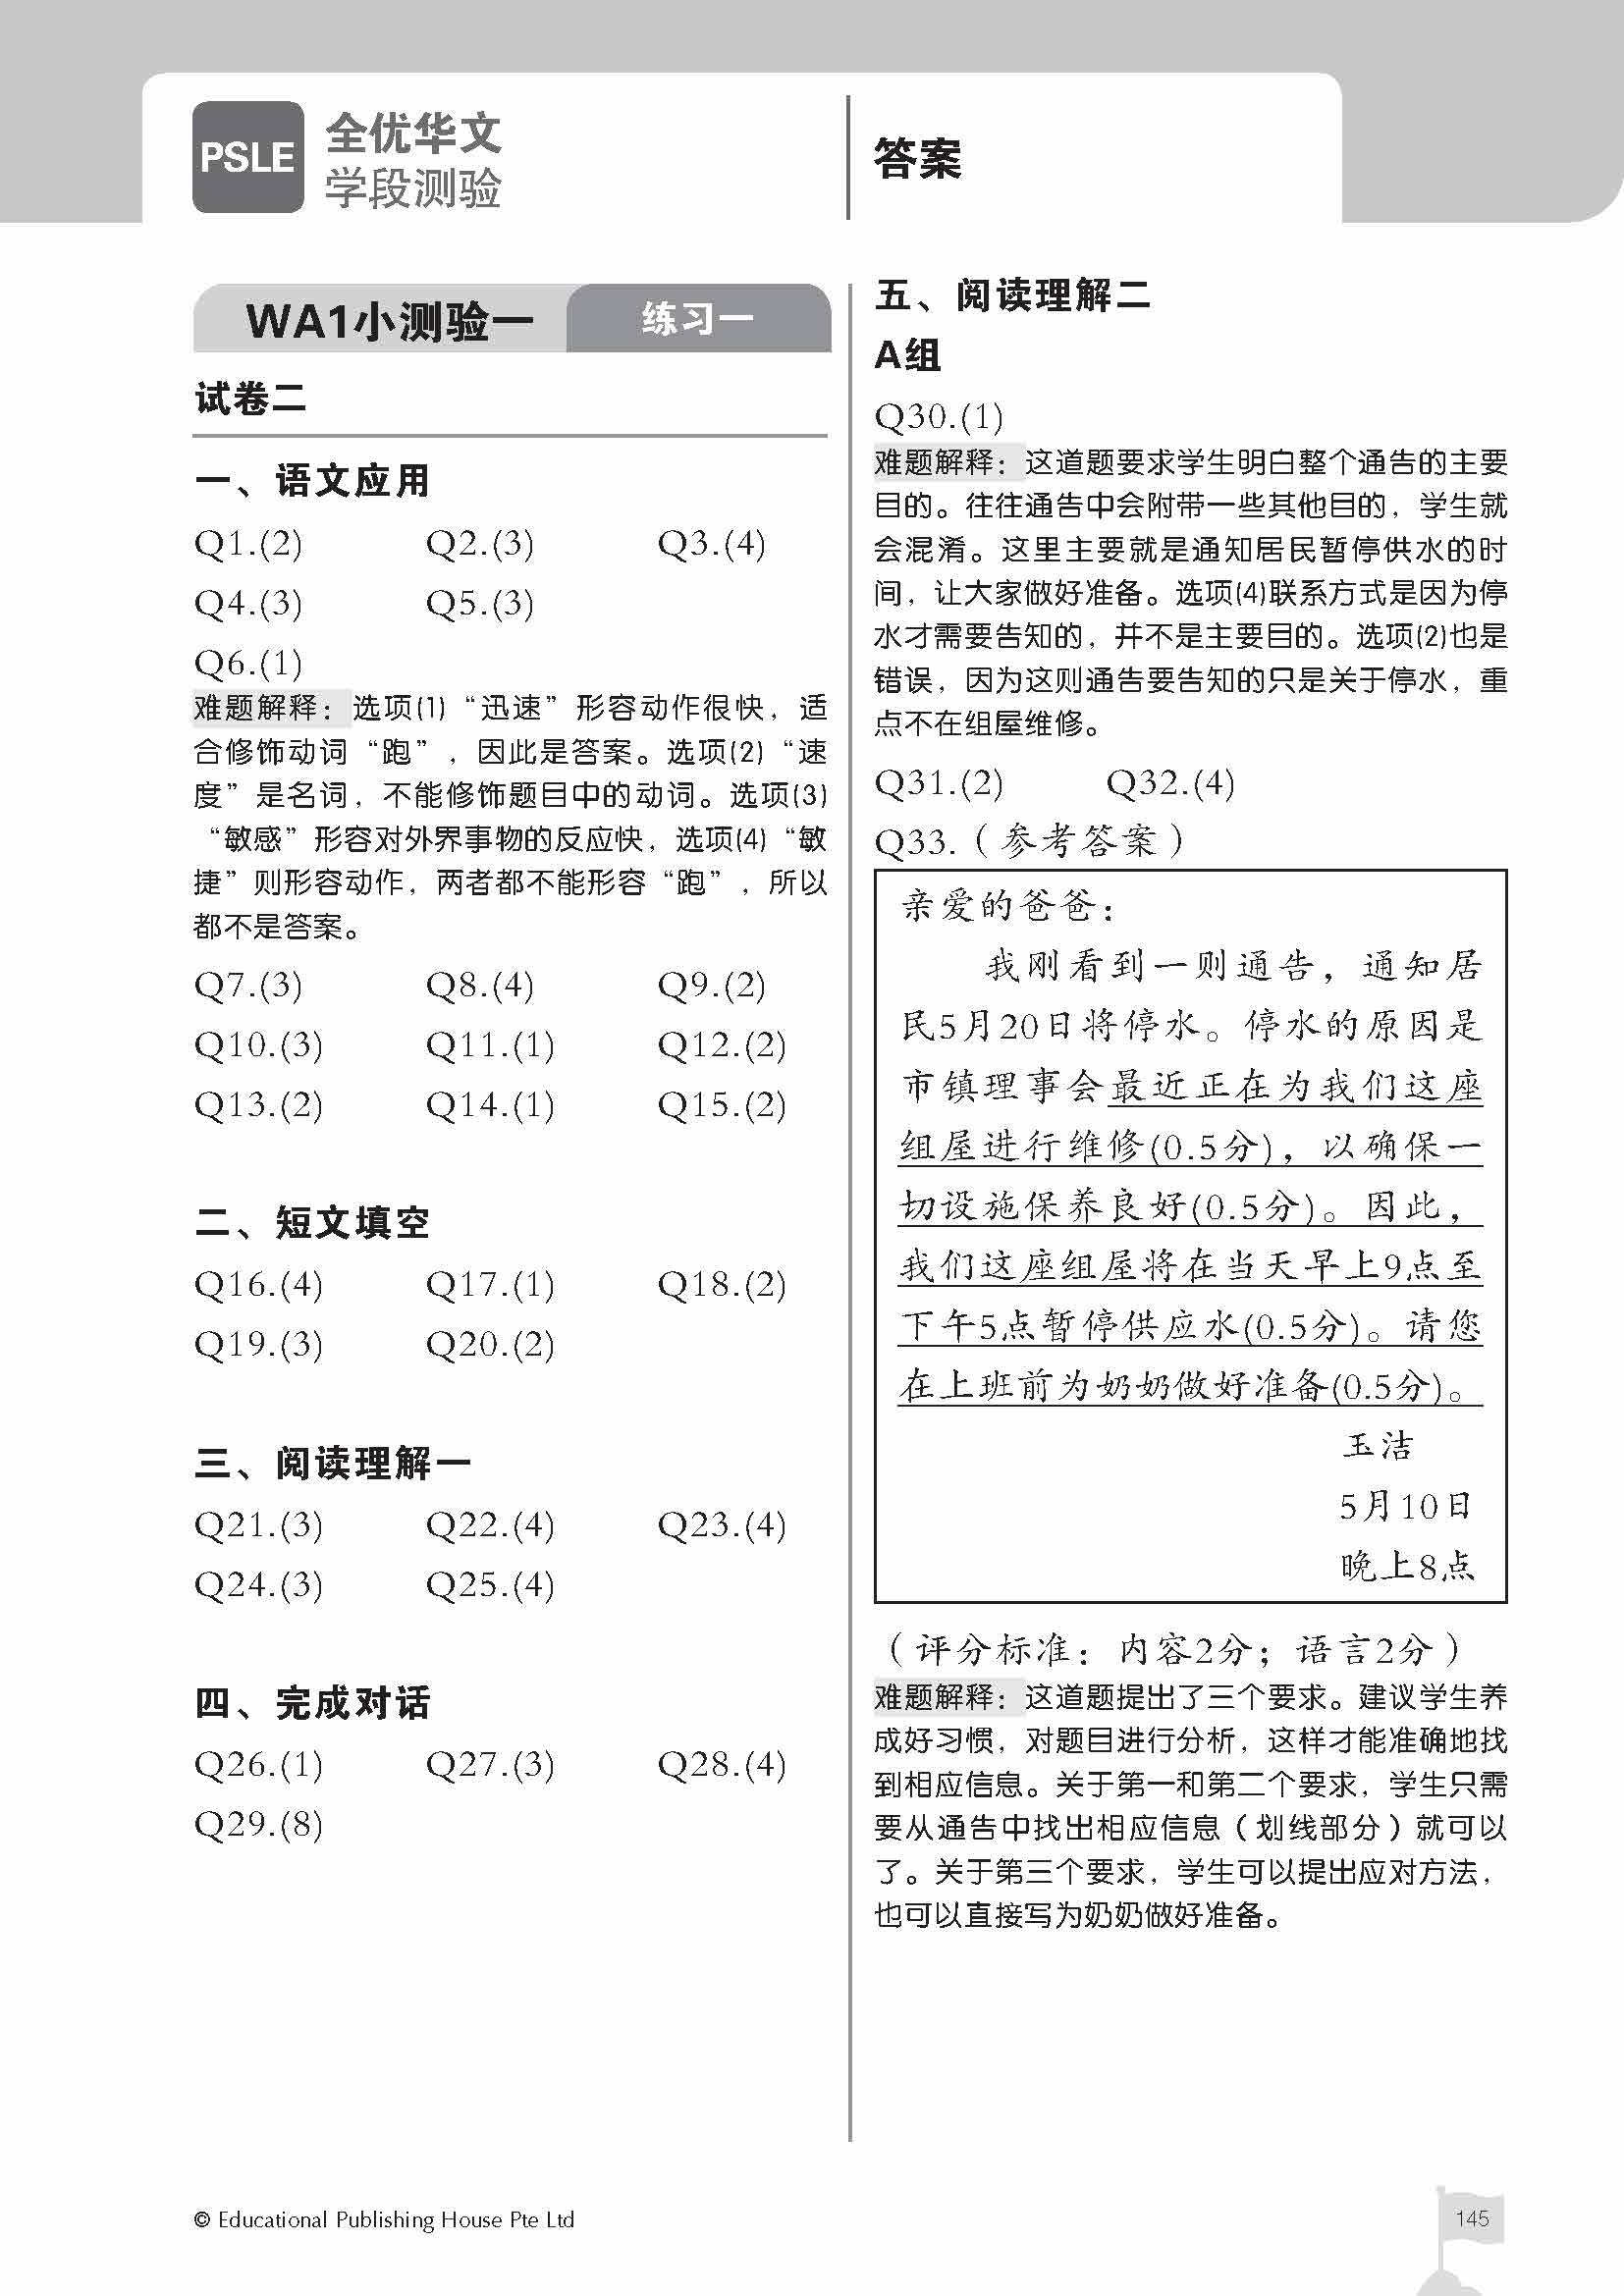 PSLE Chinese Top the Class Term & Semestral Papers - _MS, Assessment Books, CHINESE, EDUCATIONAL PUBLISHING HOUSE, PRIMARY 6, PSLE